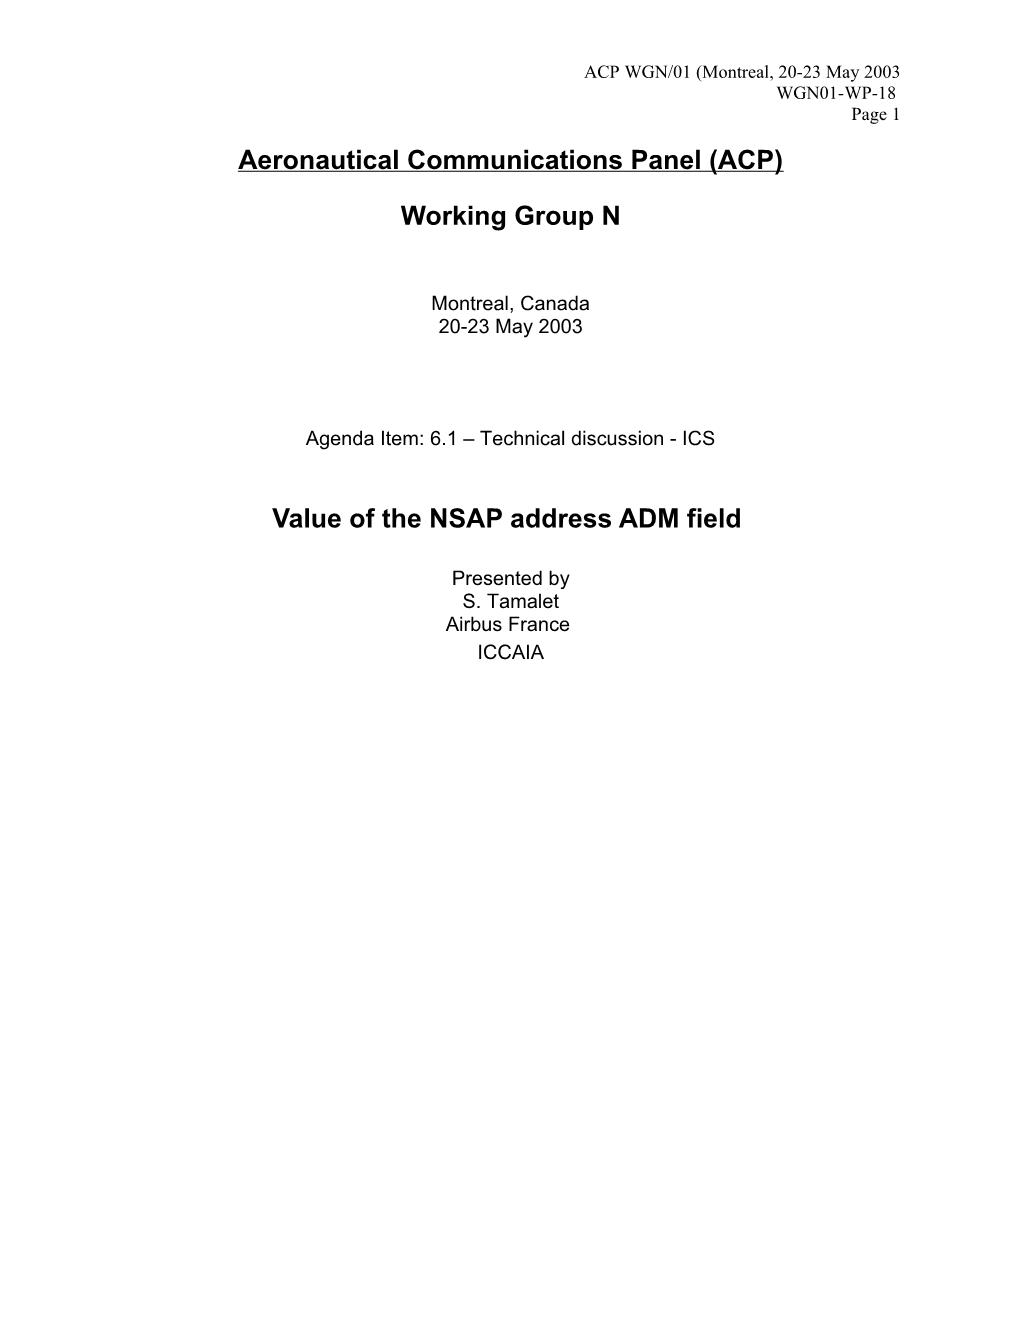 Value of the NSAP Address ADM Field